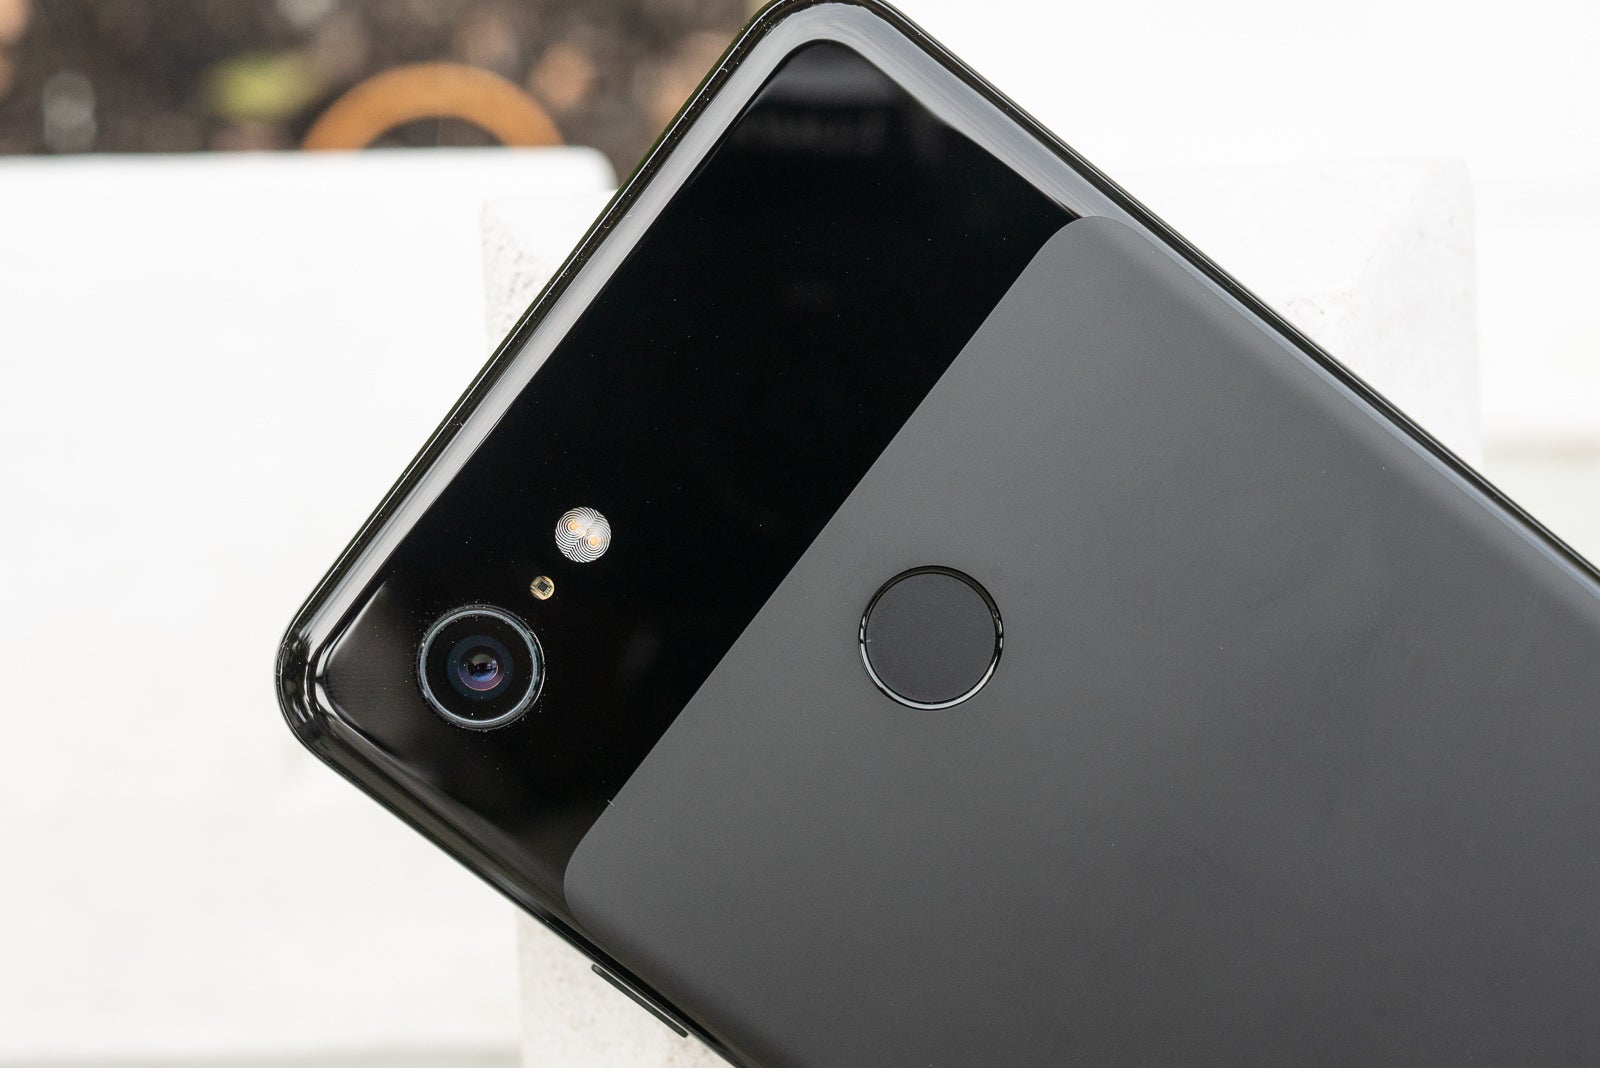 Will it be on par or better than Google Night Sight? - Apple iPhone 11 may add night mode feature to rival Google's Night Sight